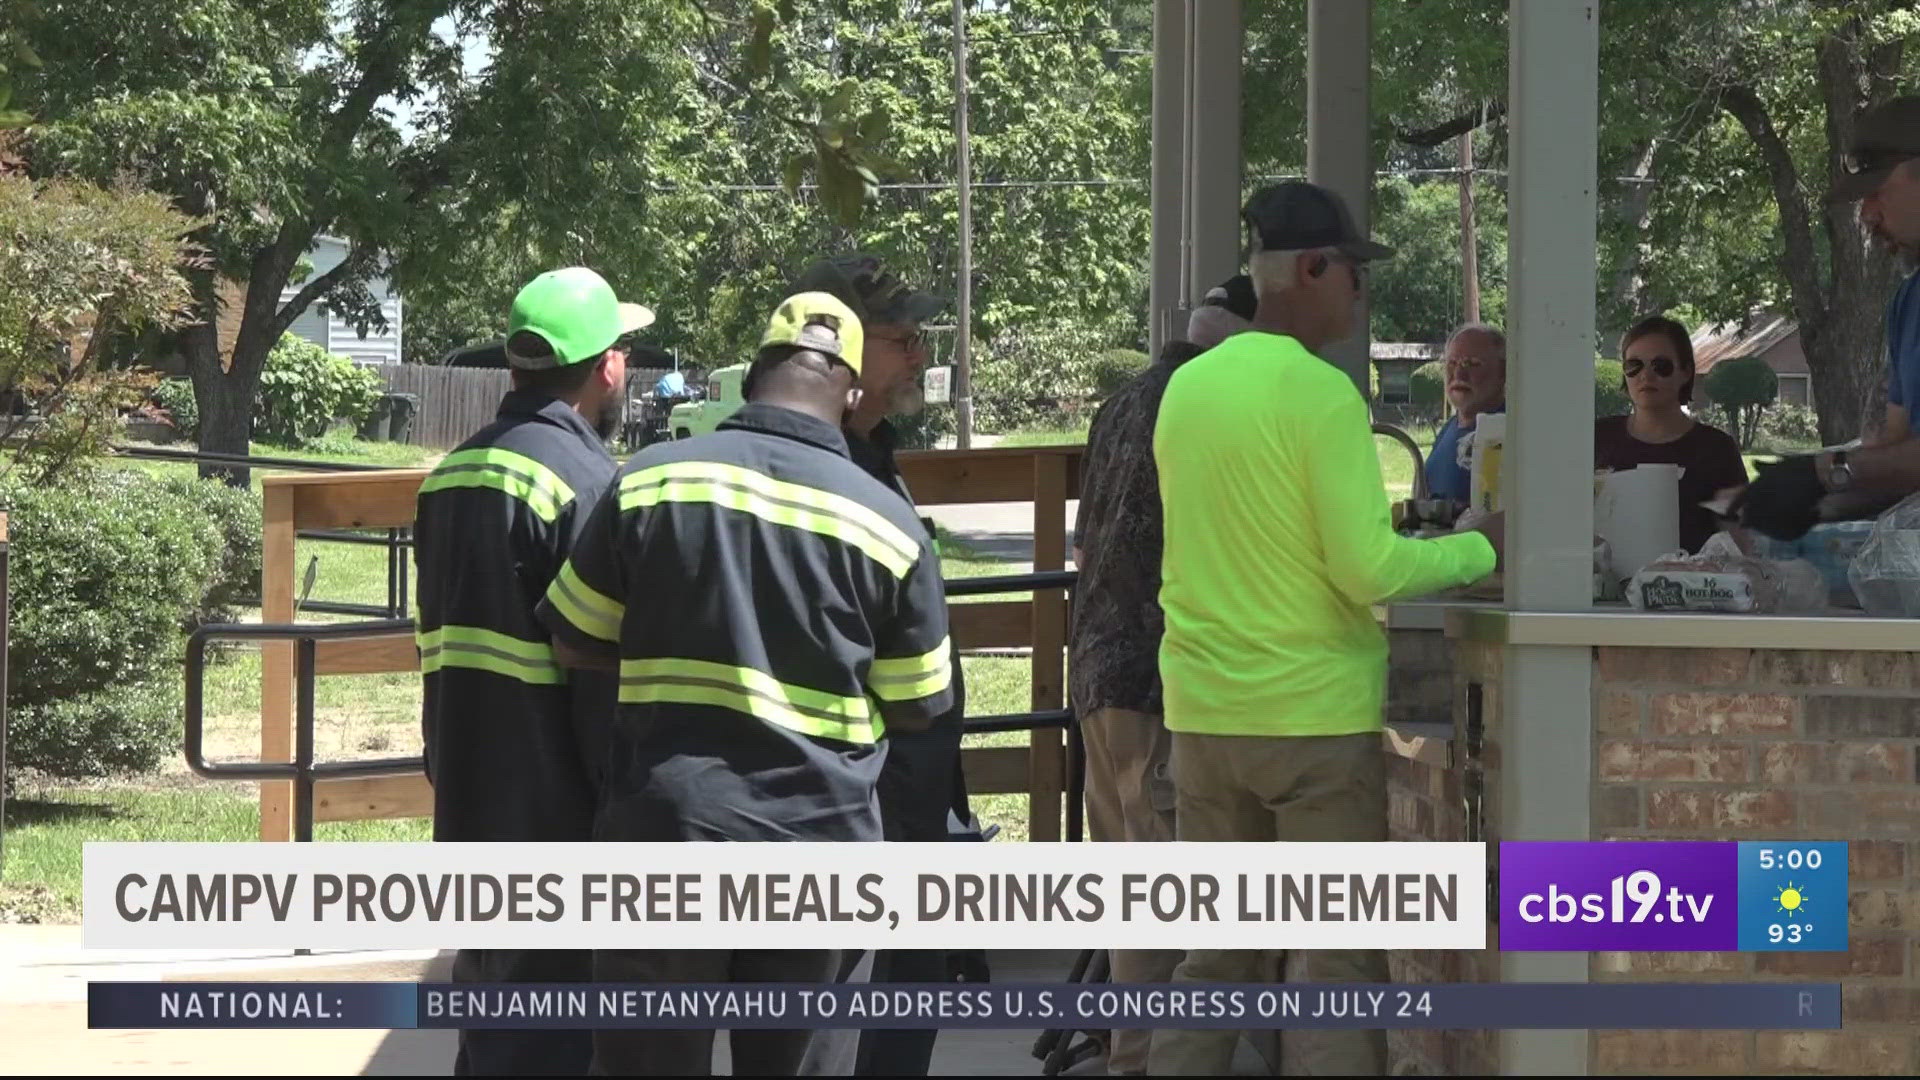 CampV serves meals to linemen, first responders working tirelessly during storm cleanup efforts